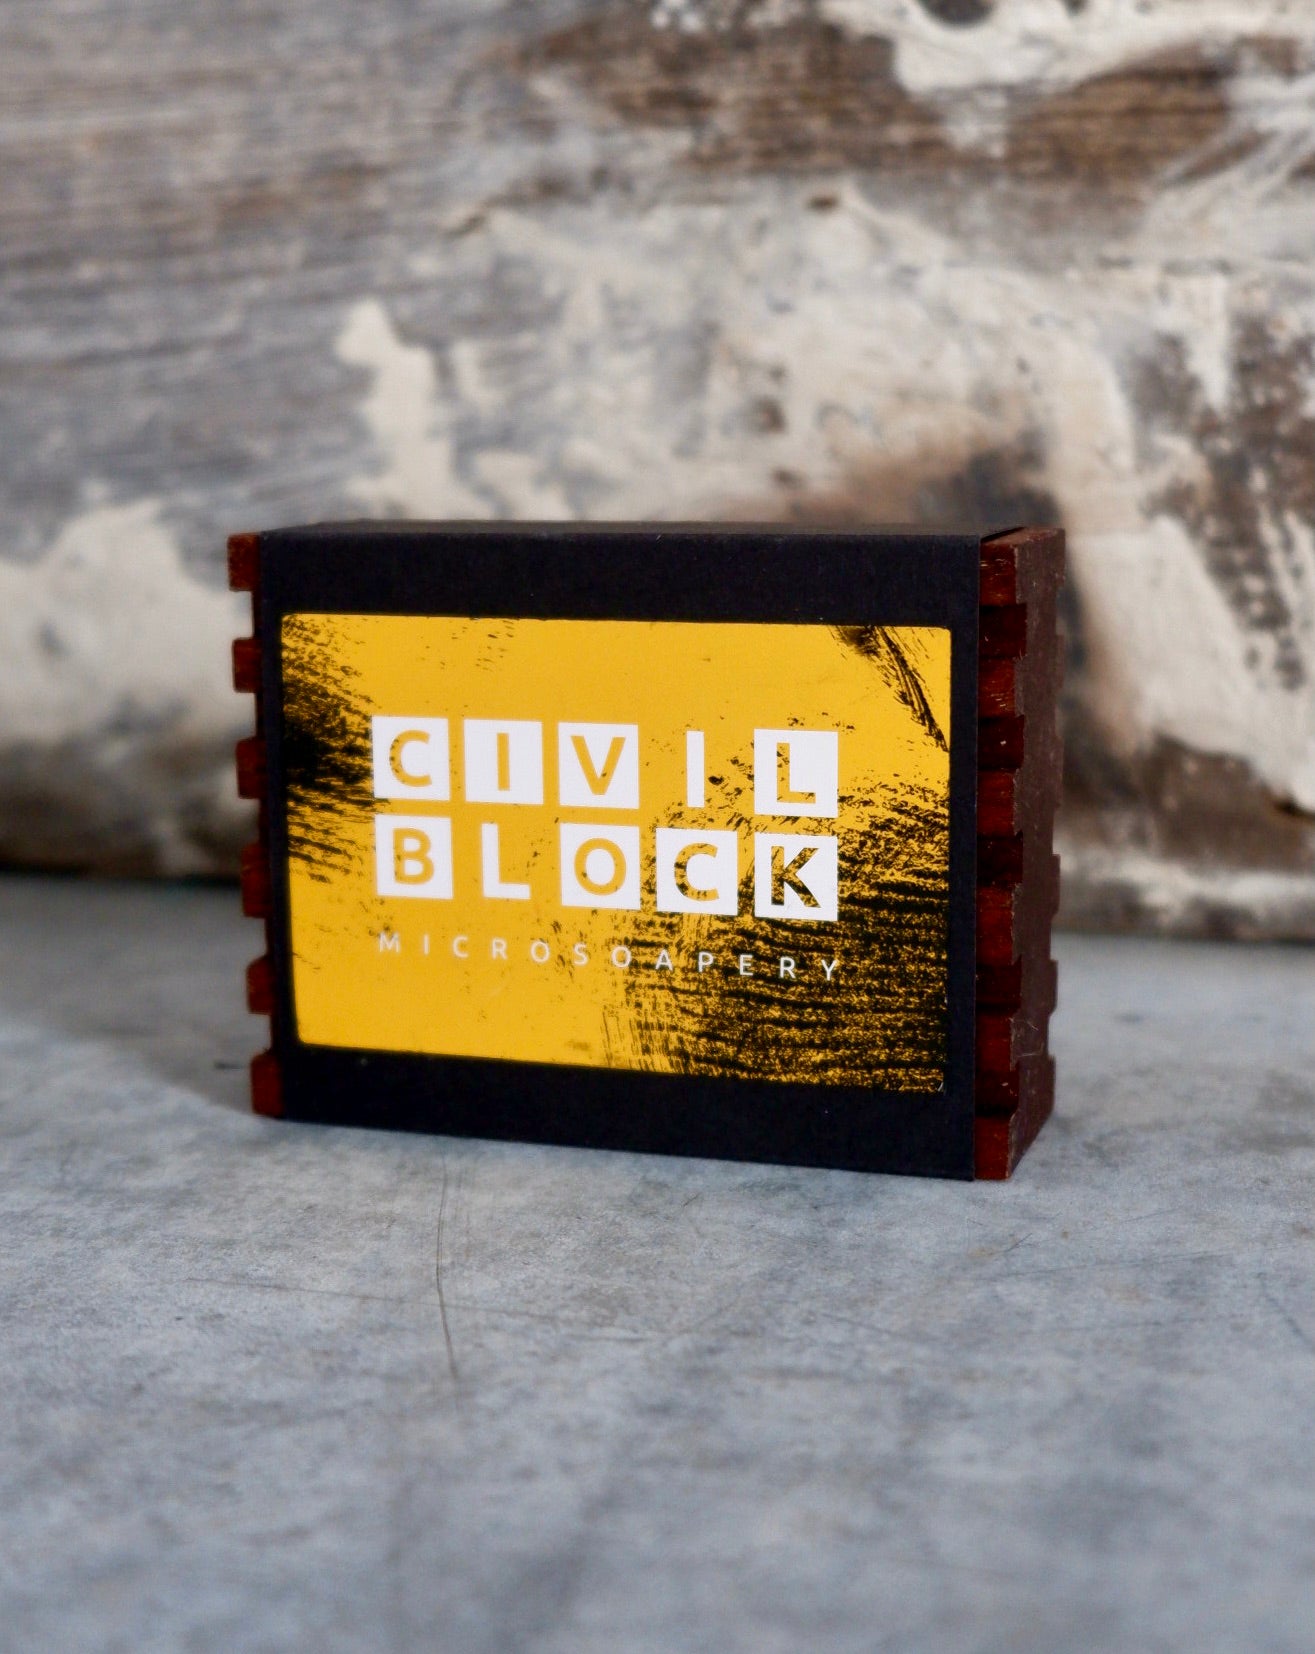 civil block microsoapery natural soap beauty and wellbeing block saver - doubled sided soap dish